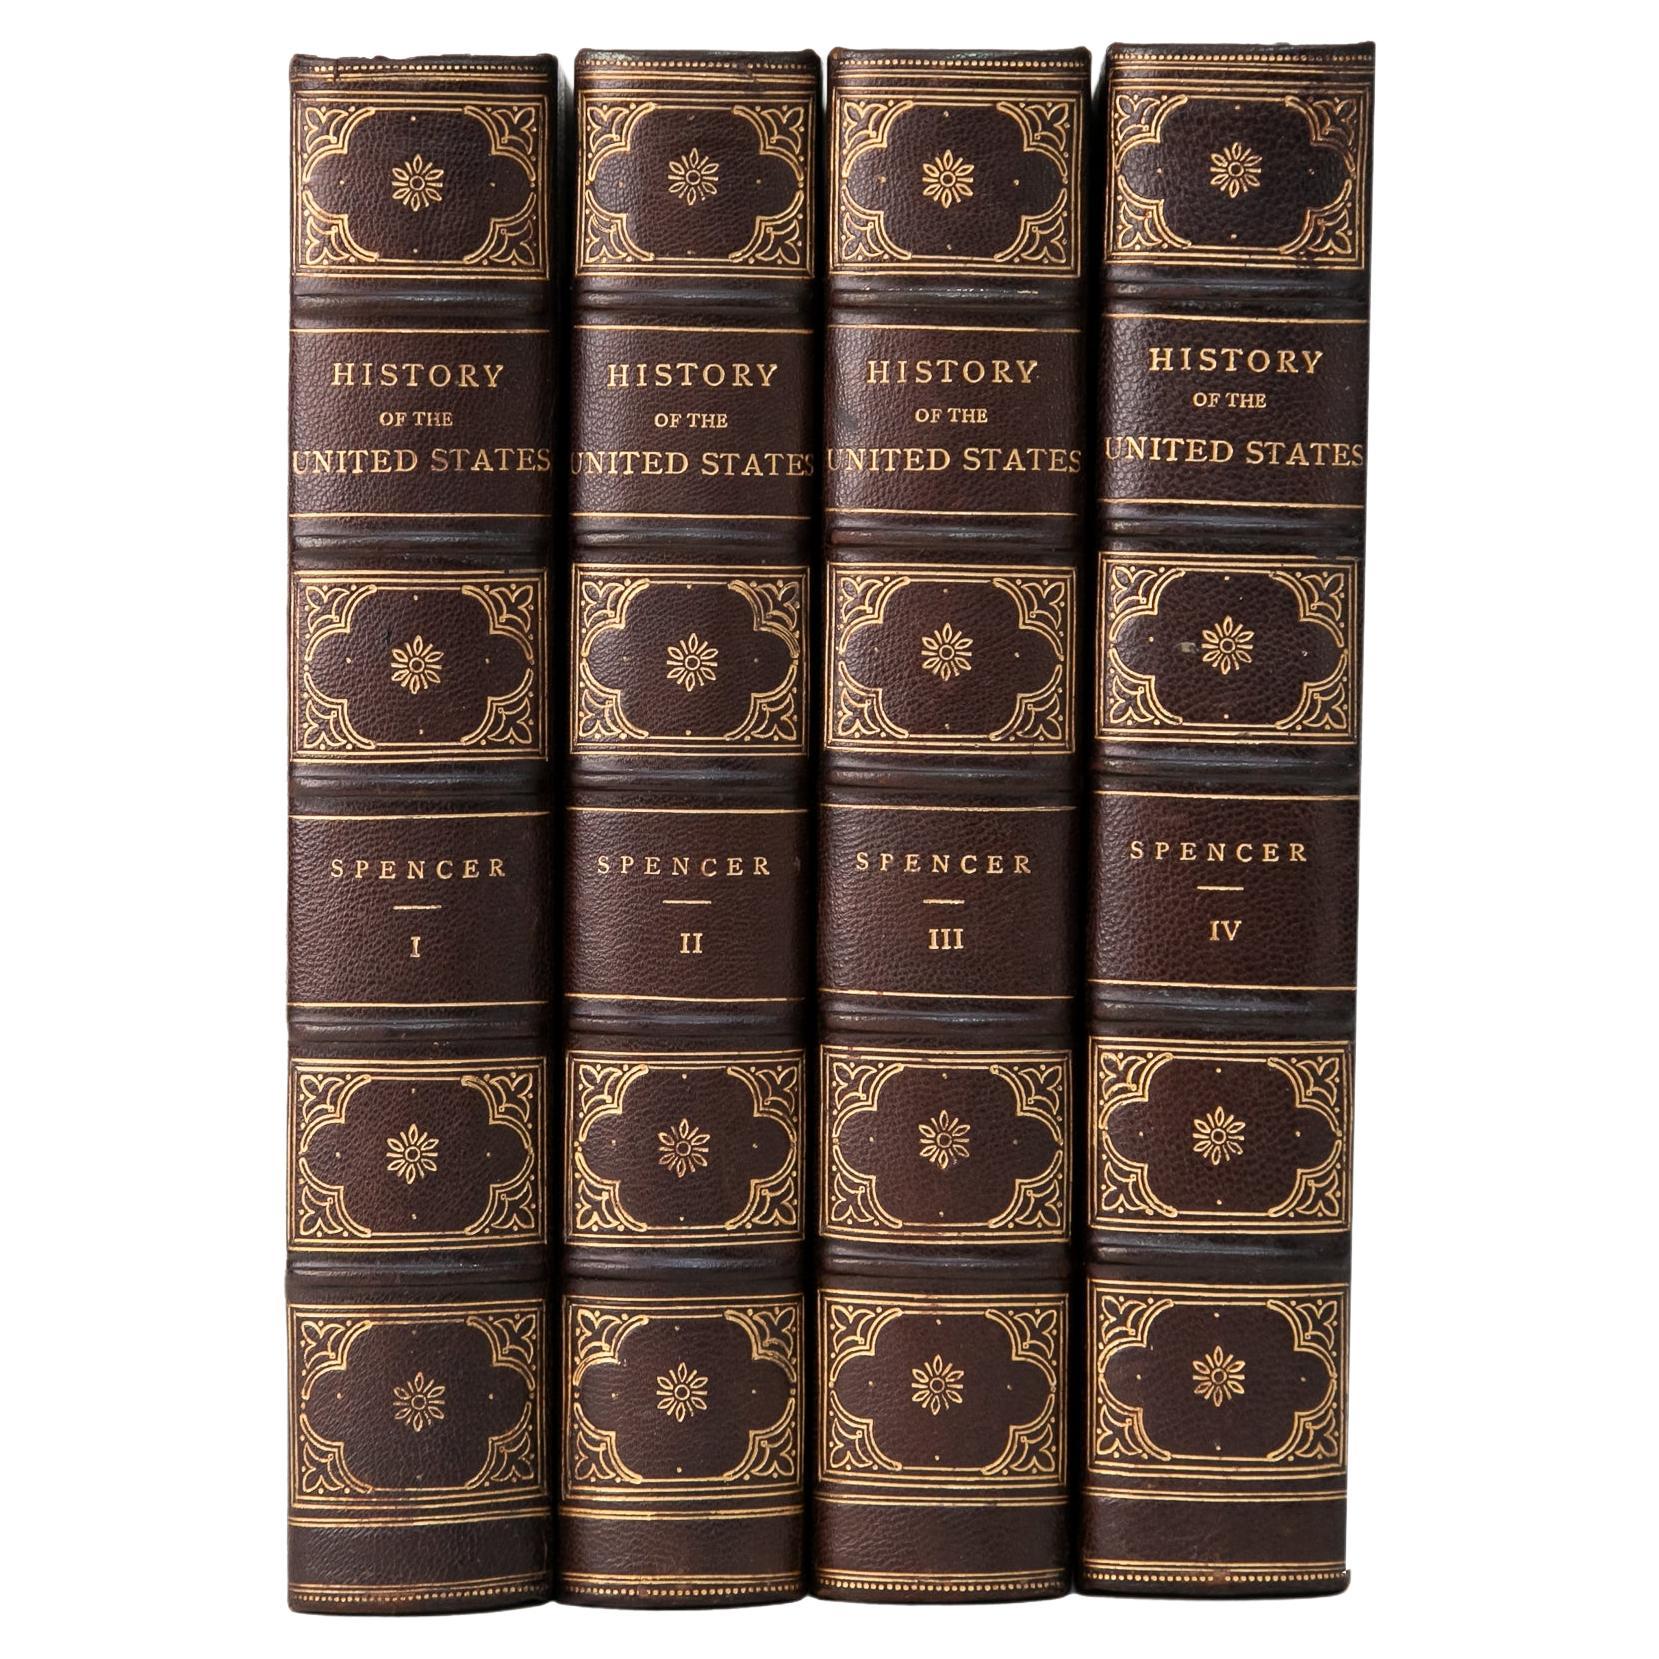 4 Volumes. J.A. Spencer, History of the United States.